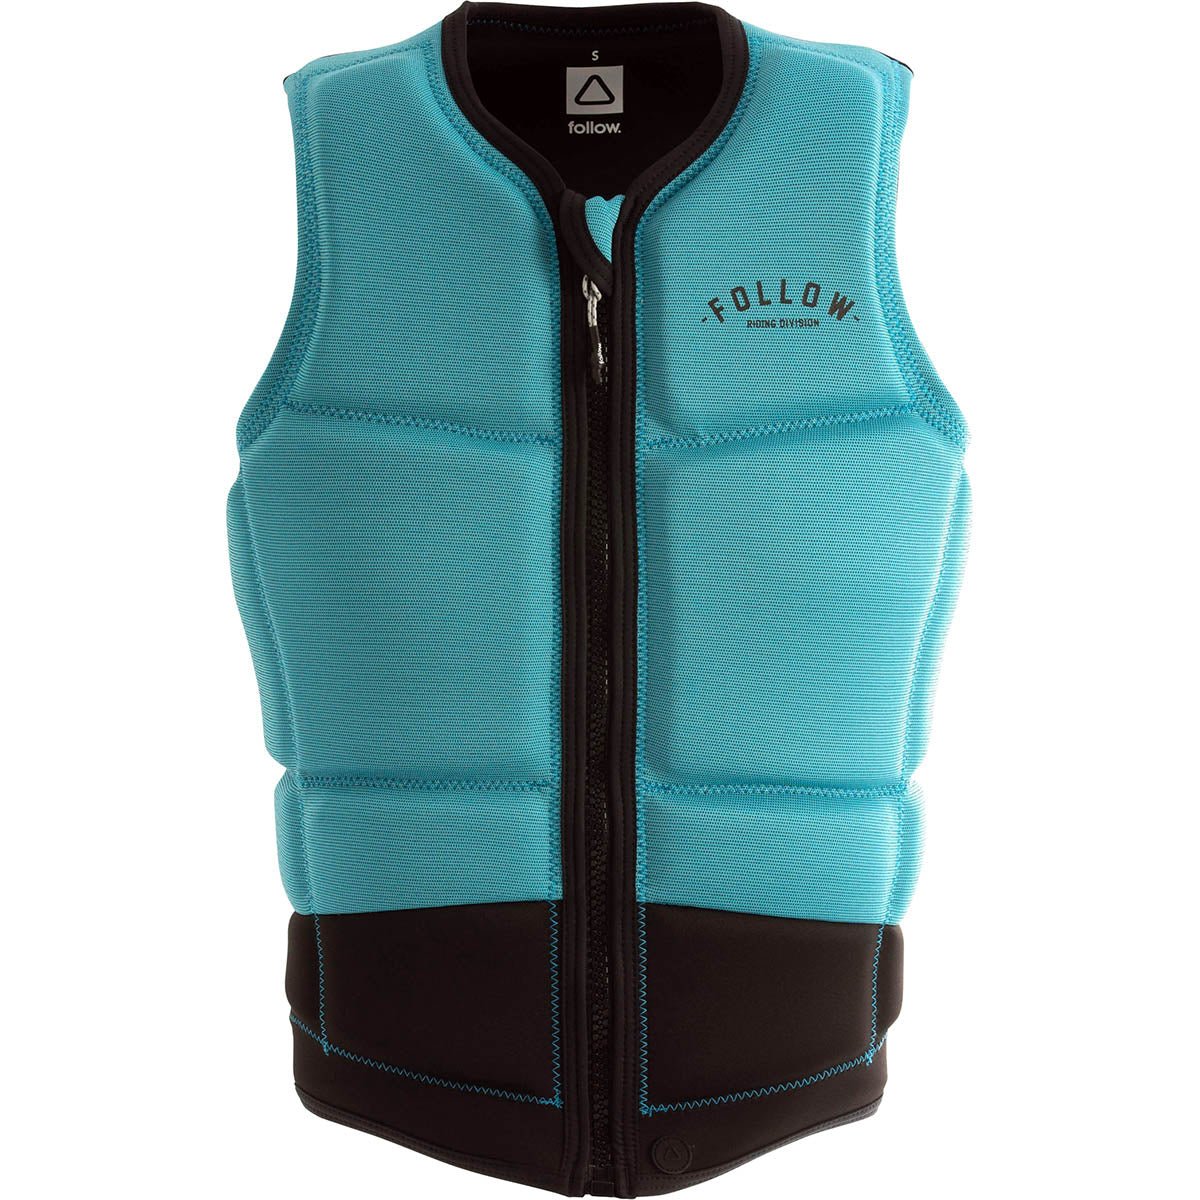 Follow Division Comp Wake Vest in Teal - BoardCo